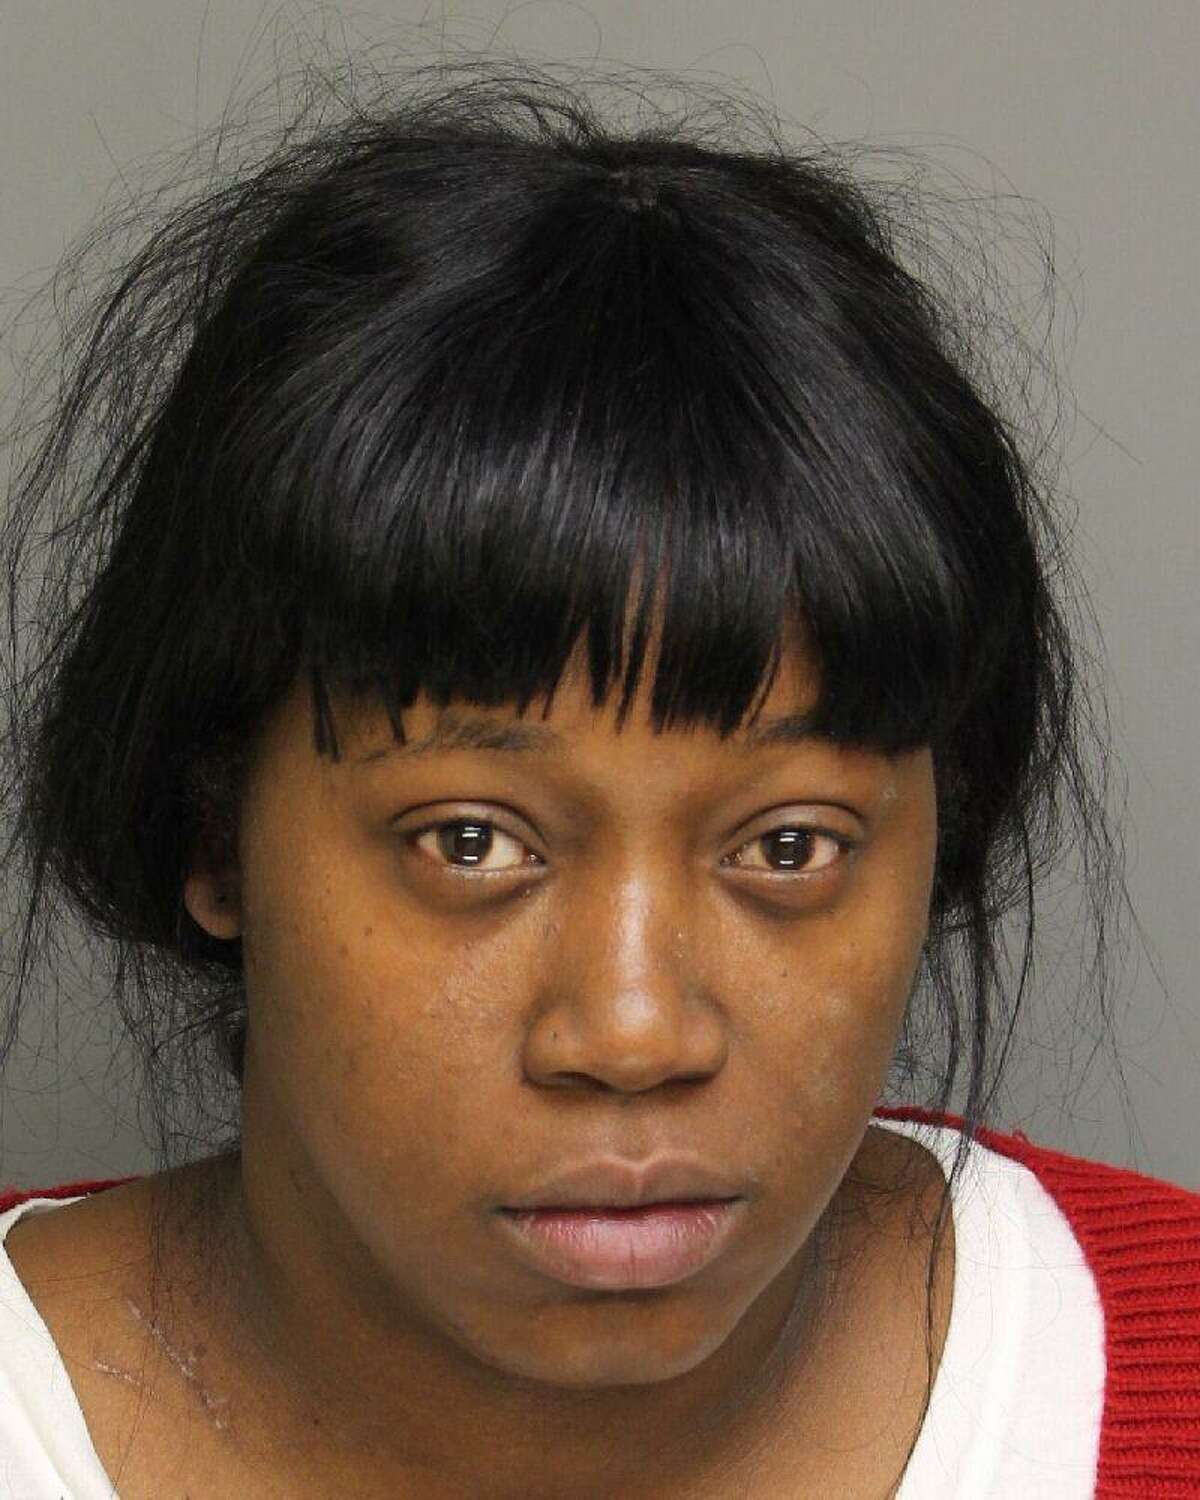 Larise King, 35, of Karen Court in Bridgeport, is wanted by city police for her role in her husband’s July 27 killing.